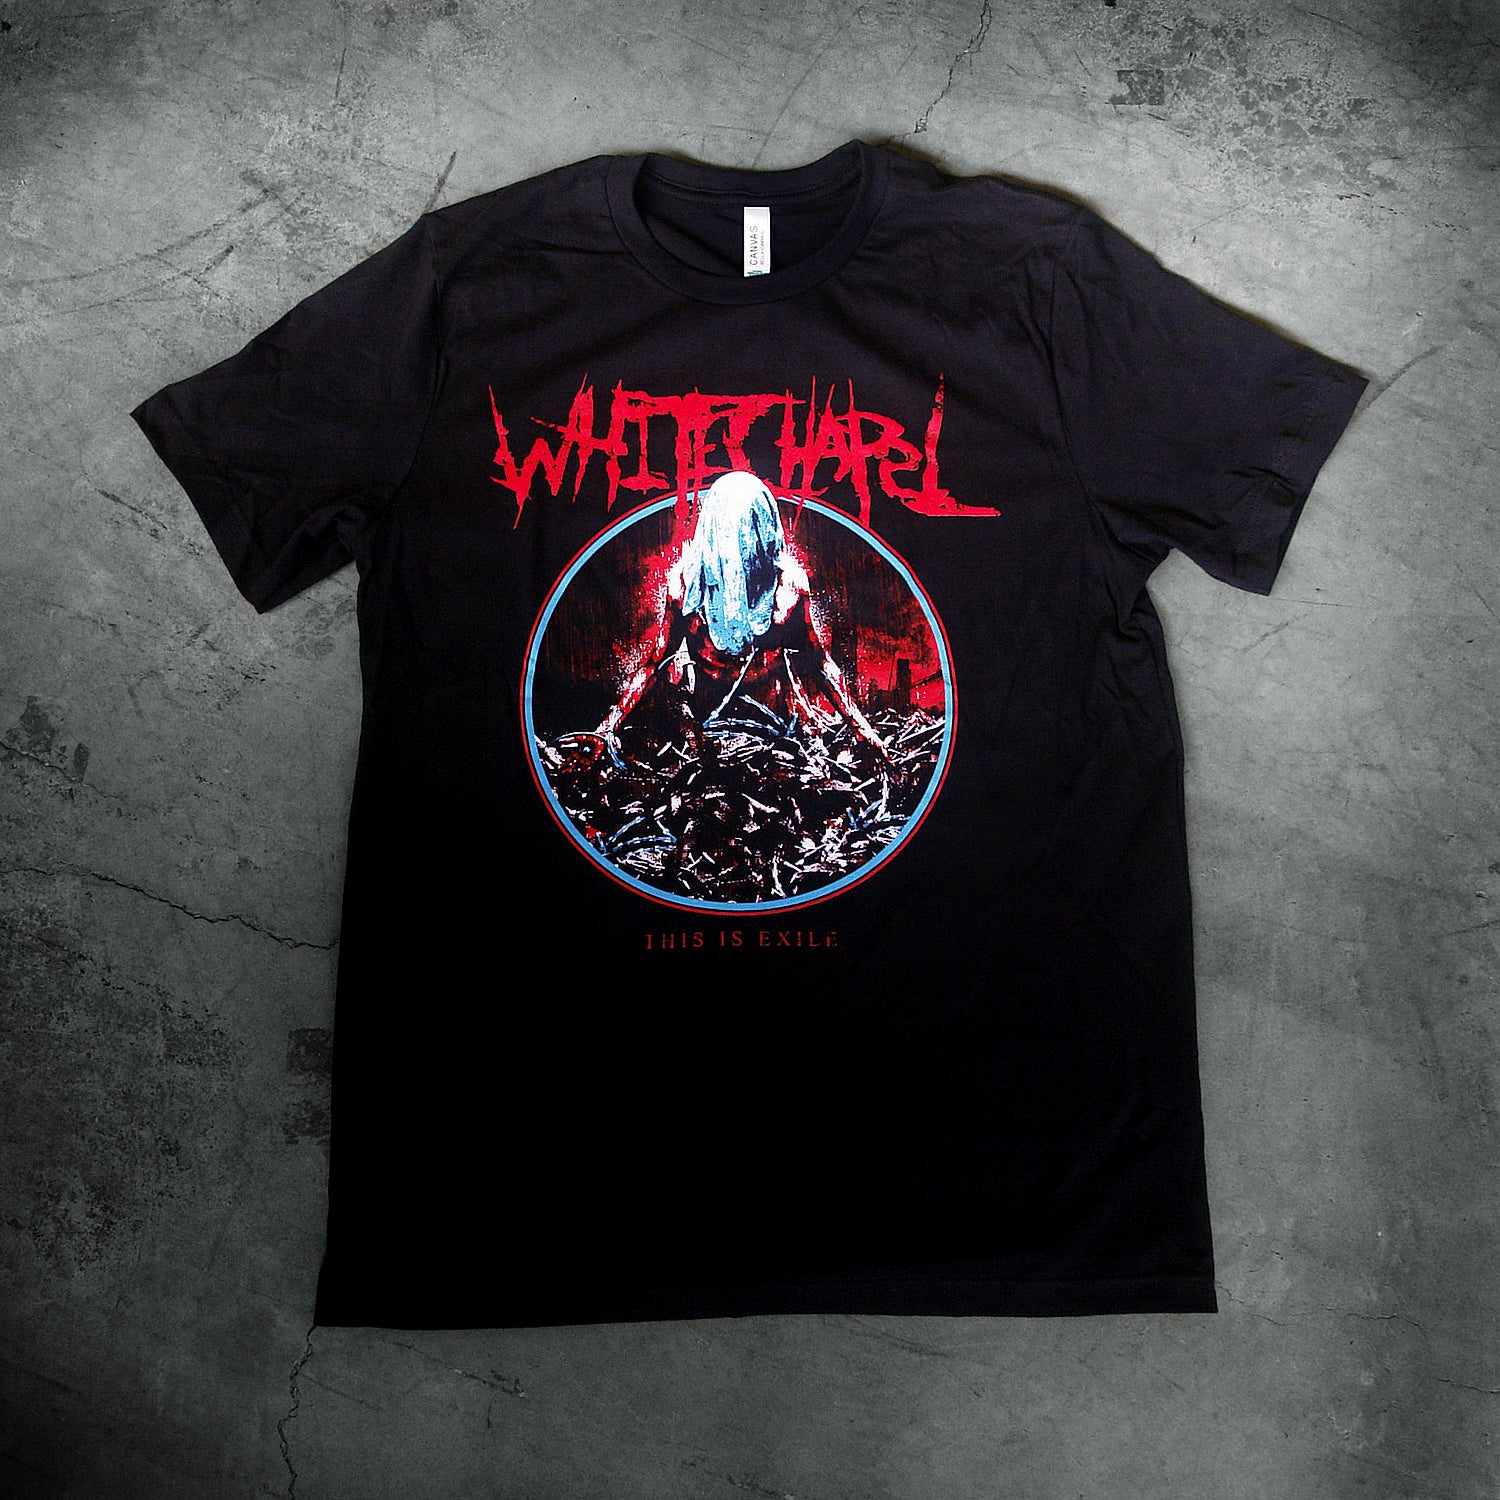 image of a black tee shirt laid flat on a concrete floor. tee has center chest print. at the top in red says whitechapel. below is a circle, with an image of a man with a sheet over his head wrapped in barbed wire. at the bottom says this is exile.